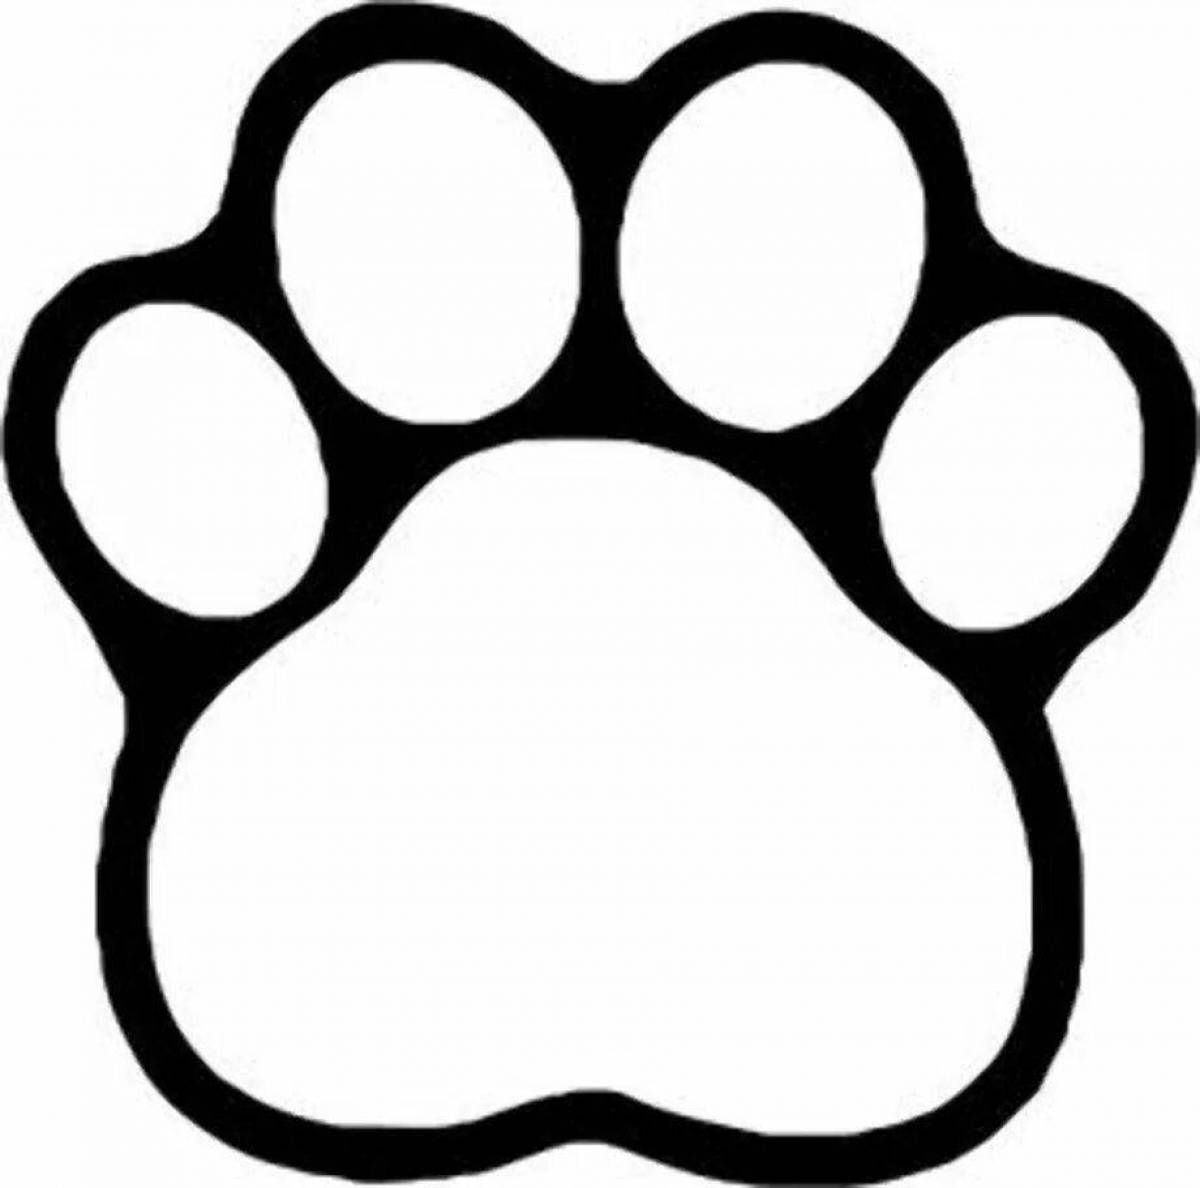 Coloring page wild cat's paw